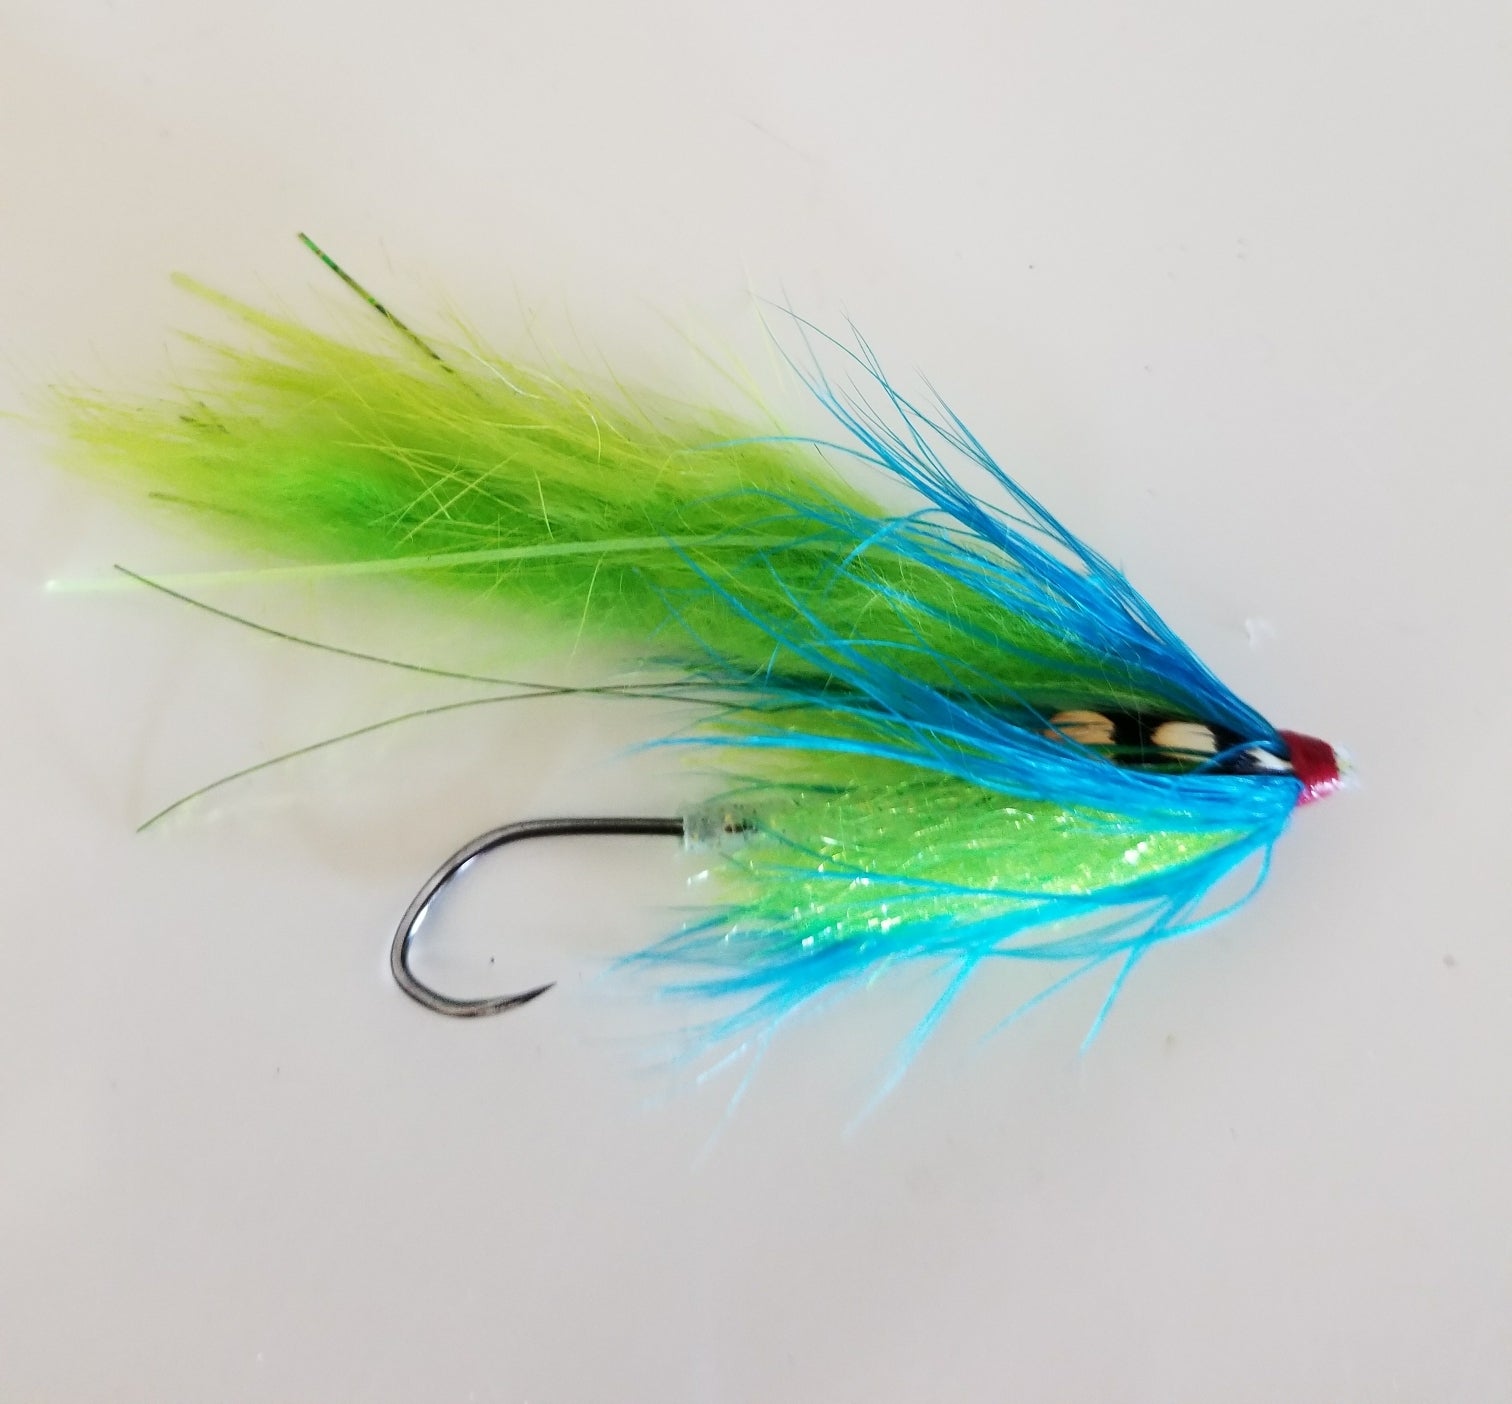 Barbless Bead, Tube Fly, and Intruder Hook Size 1 12 Pack